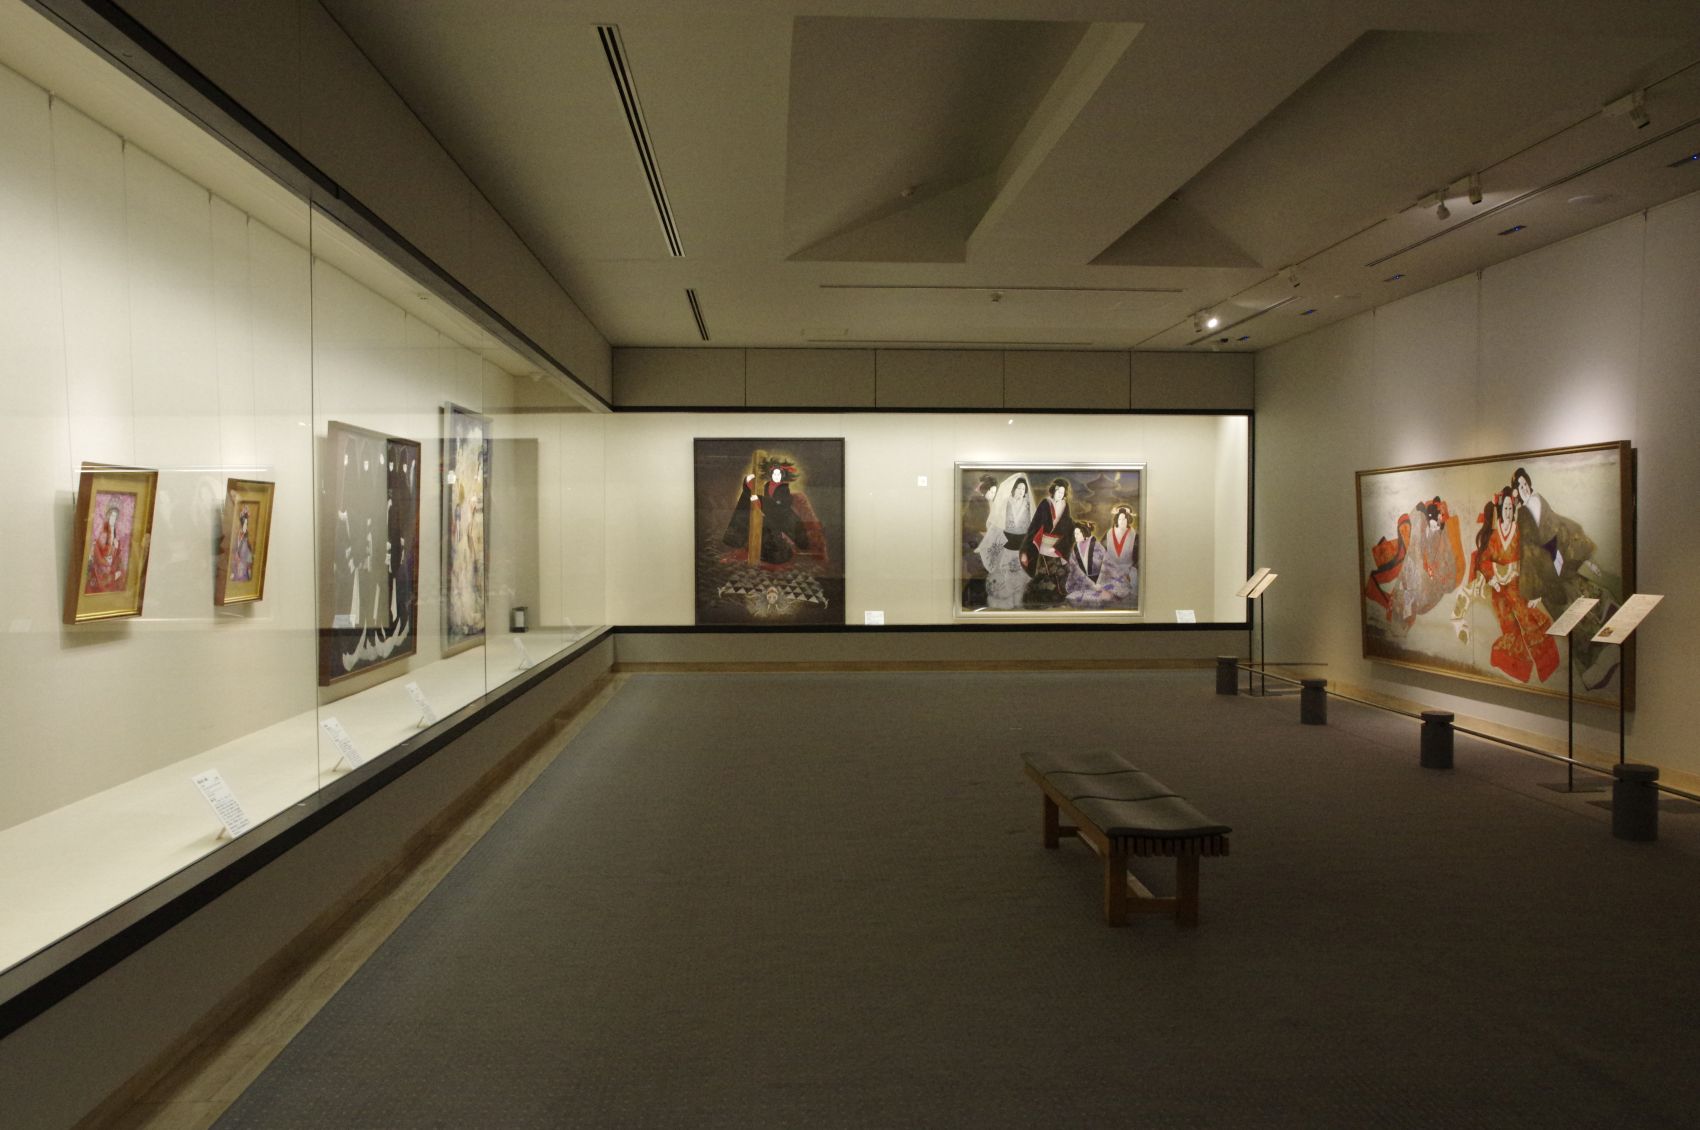 You Can Almost Hear Music As You View This Matsuoka Museum of Art Exhibition